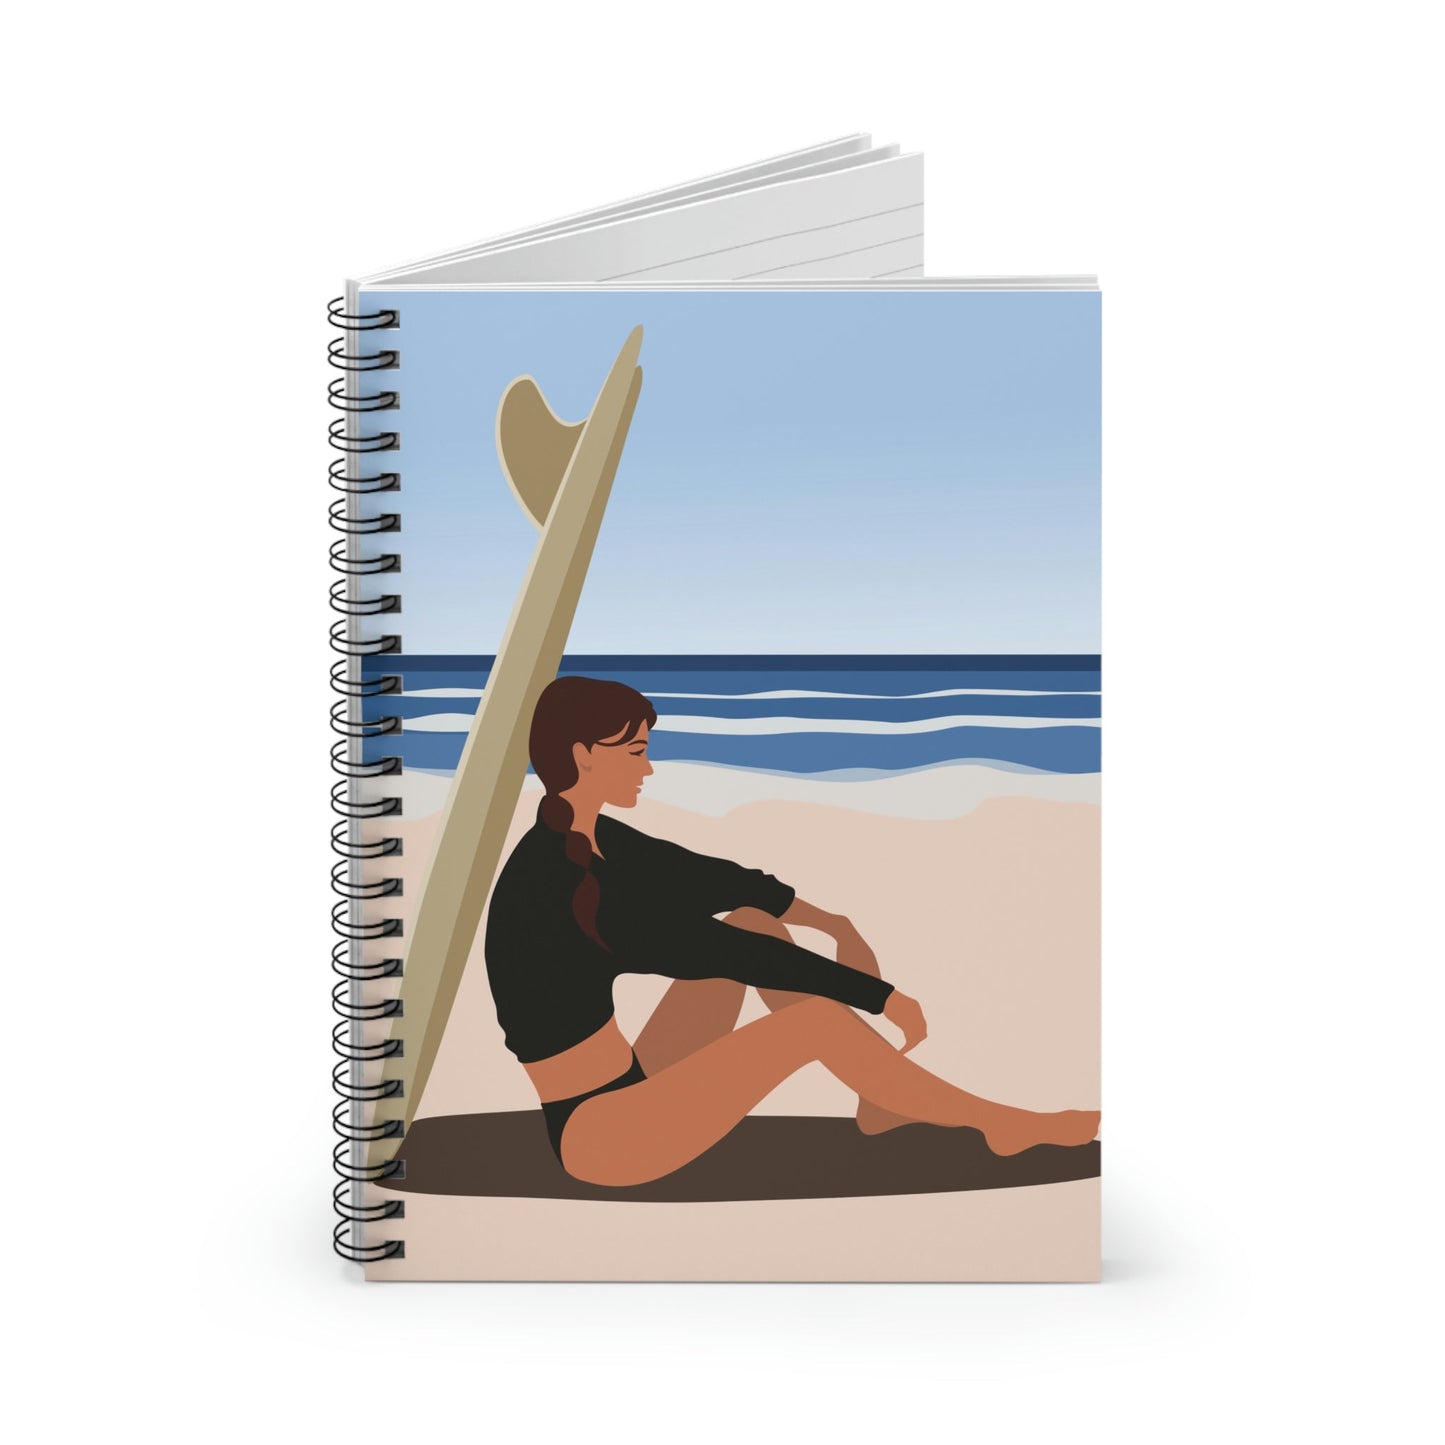 Serenity by the Sea Woman Sitting on Beach Spiral Notebook Ruled Line Ichaku [Perfect Gifts Selection]